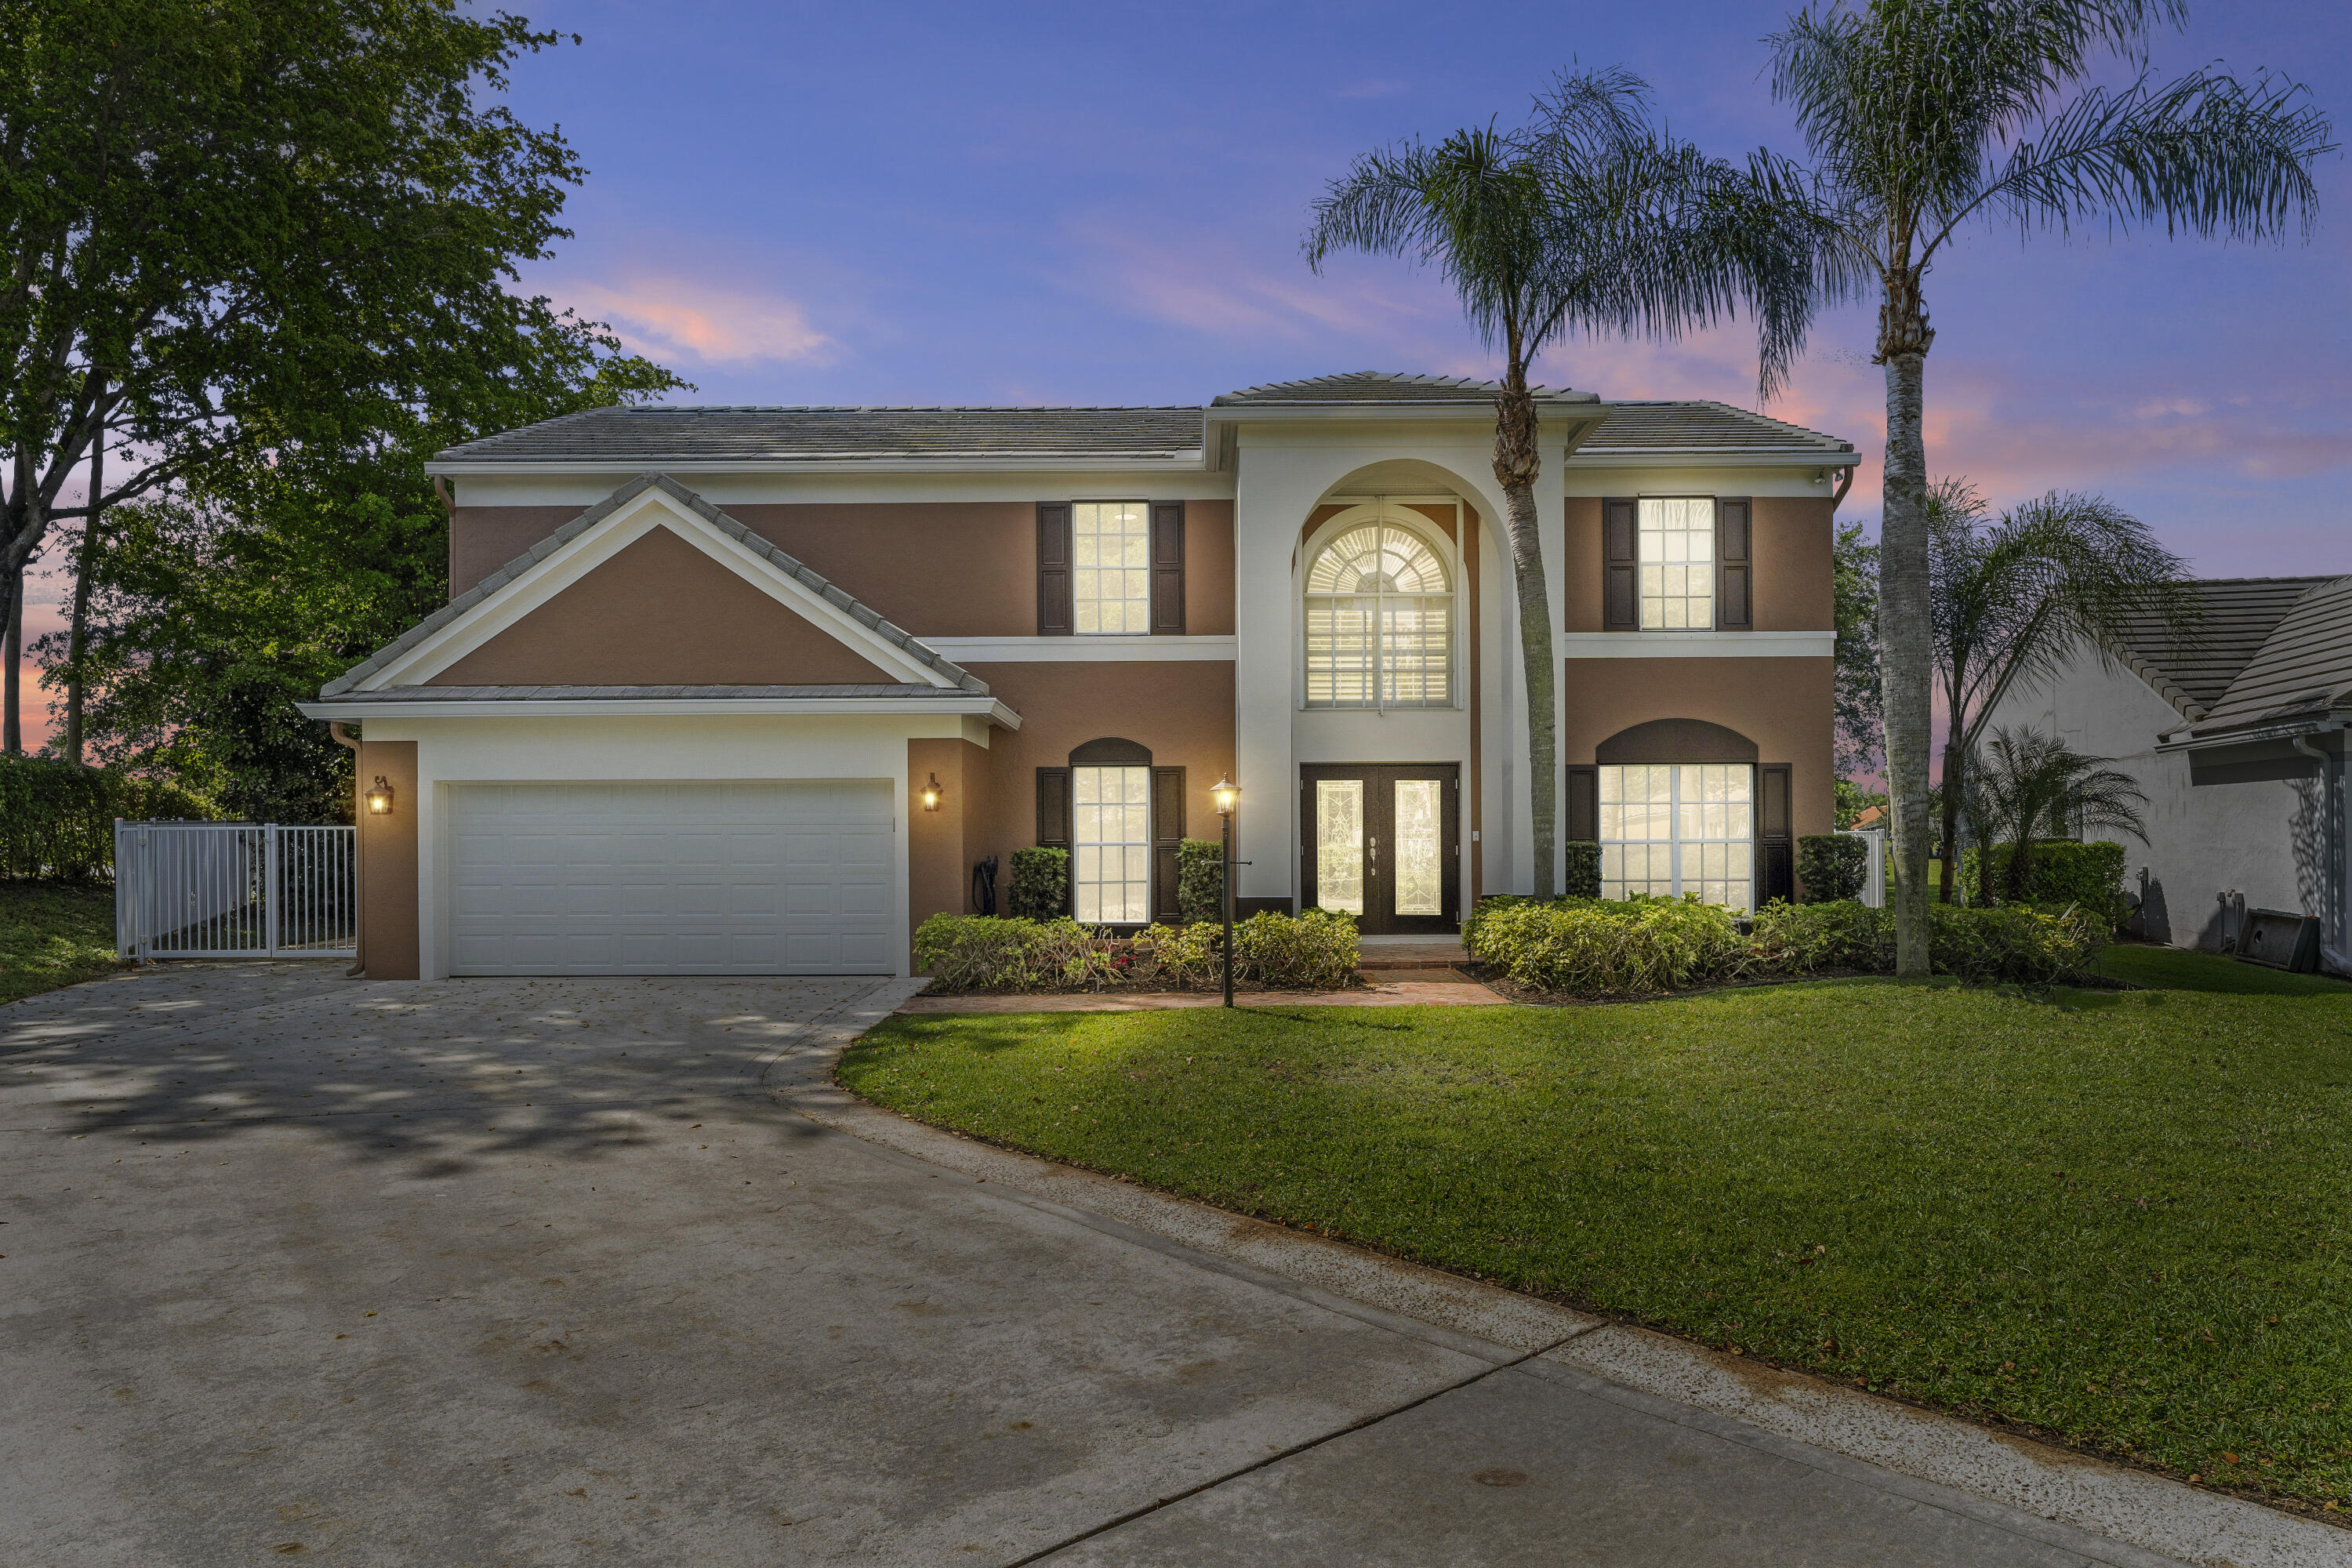 6256 Cog Hill Court, Lake Worth, Palm Beach County, Florida - 4 Bedrooms  
2.5 Bathrooms - 